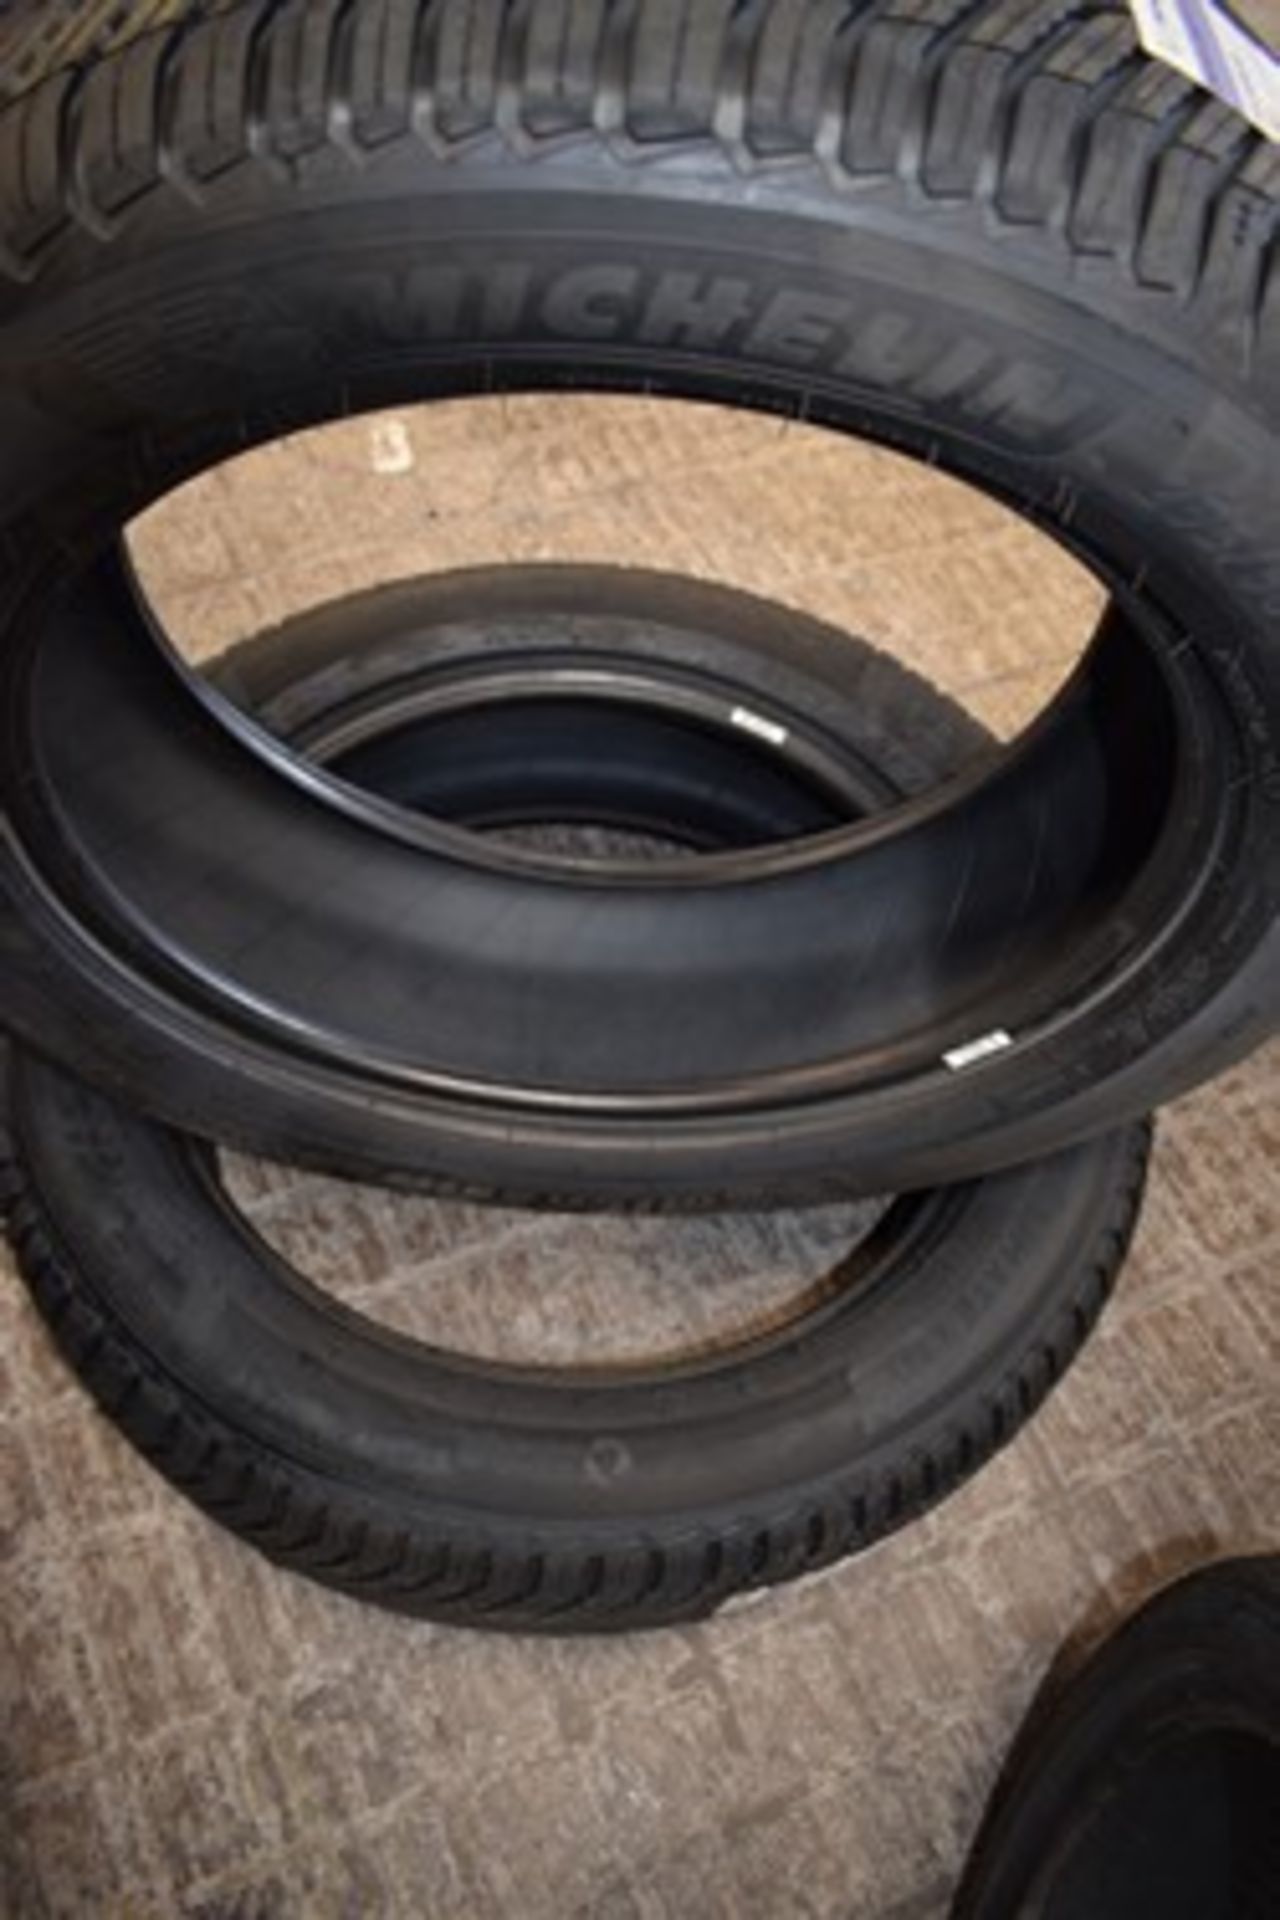 1 x pair of Michelin Cross Climate 2 SUV tyres, size 255/50R20 109Y XLTL - new with labels (cage - Image 2 of 2